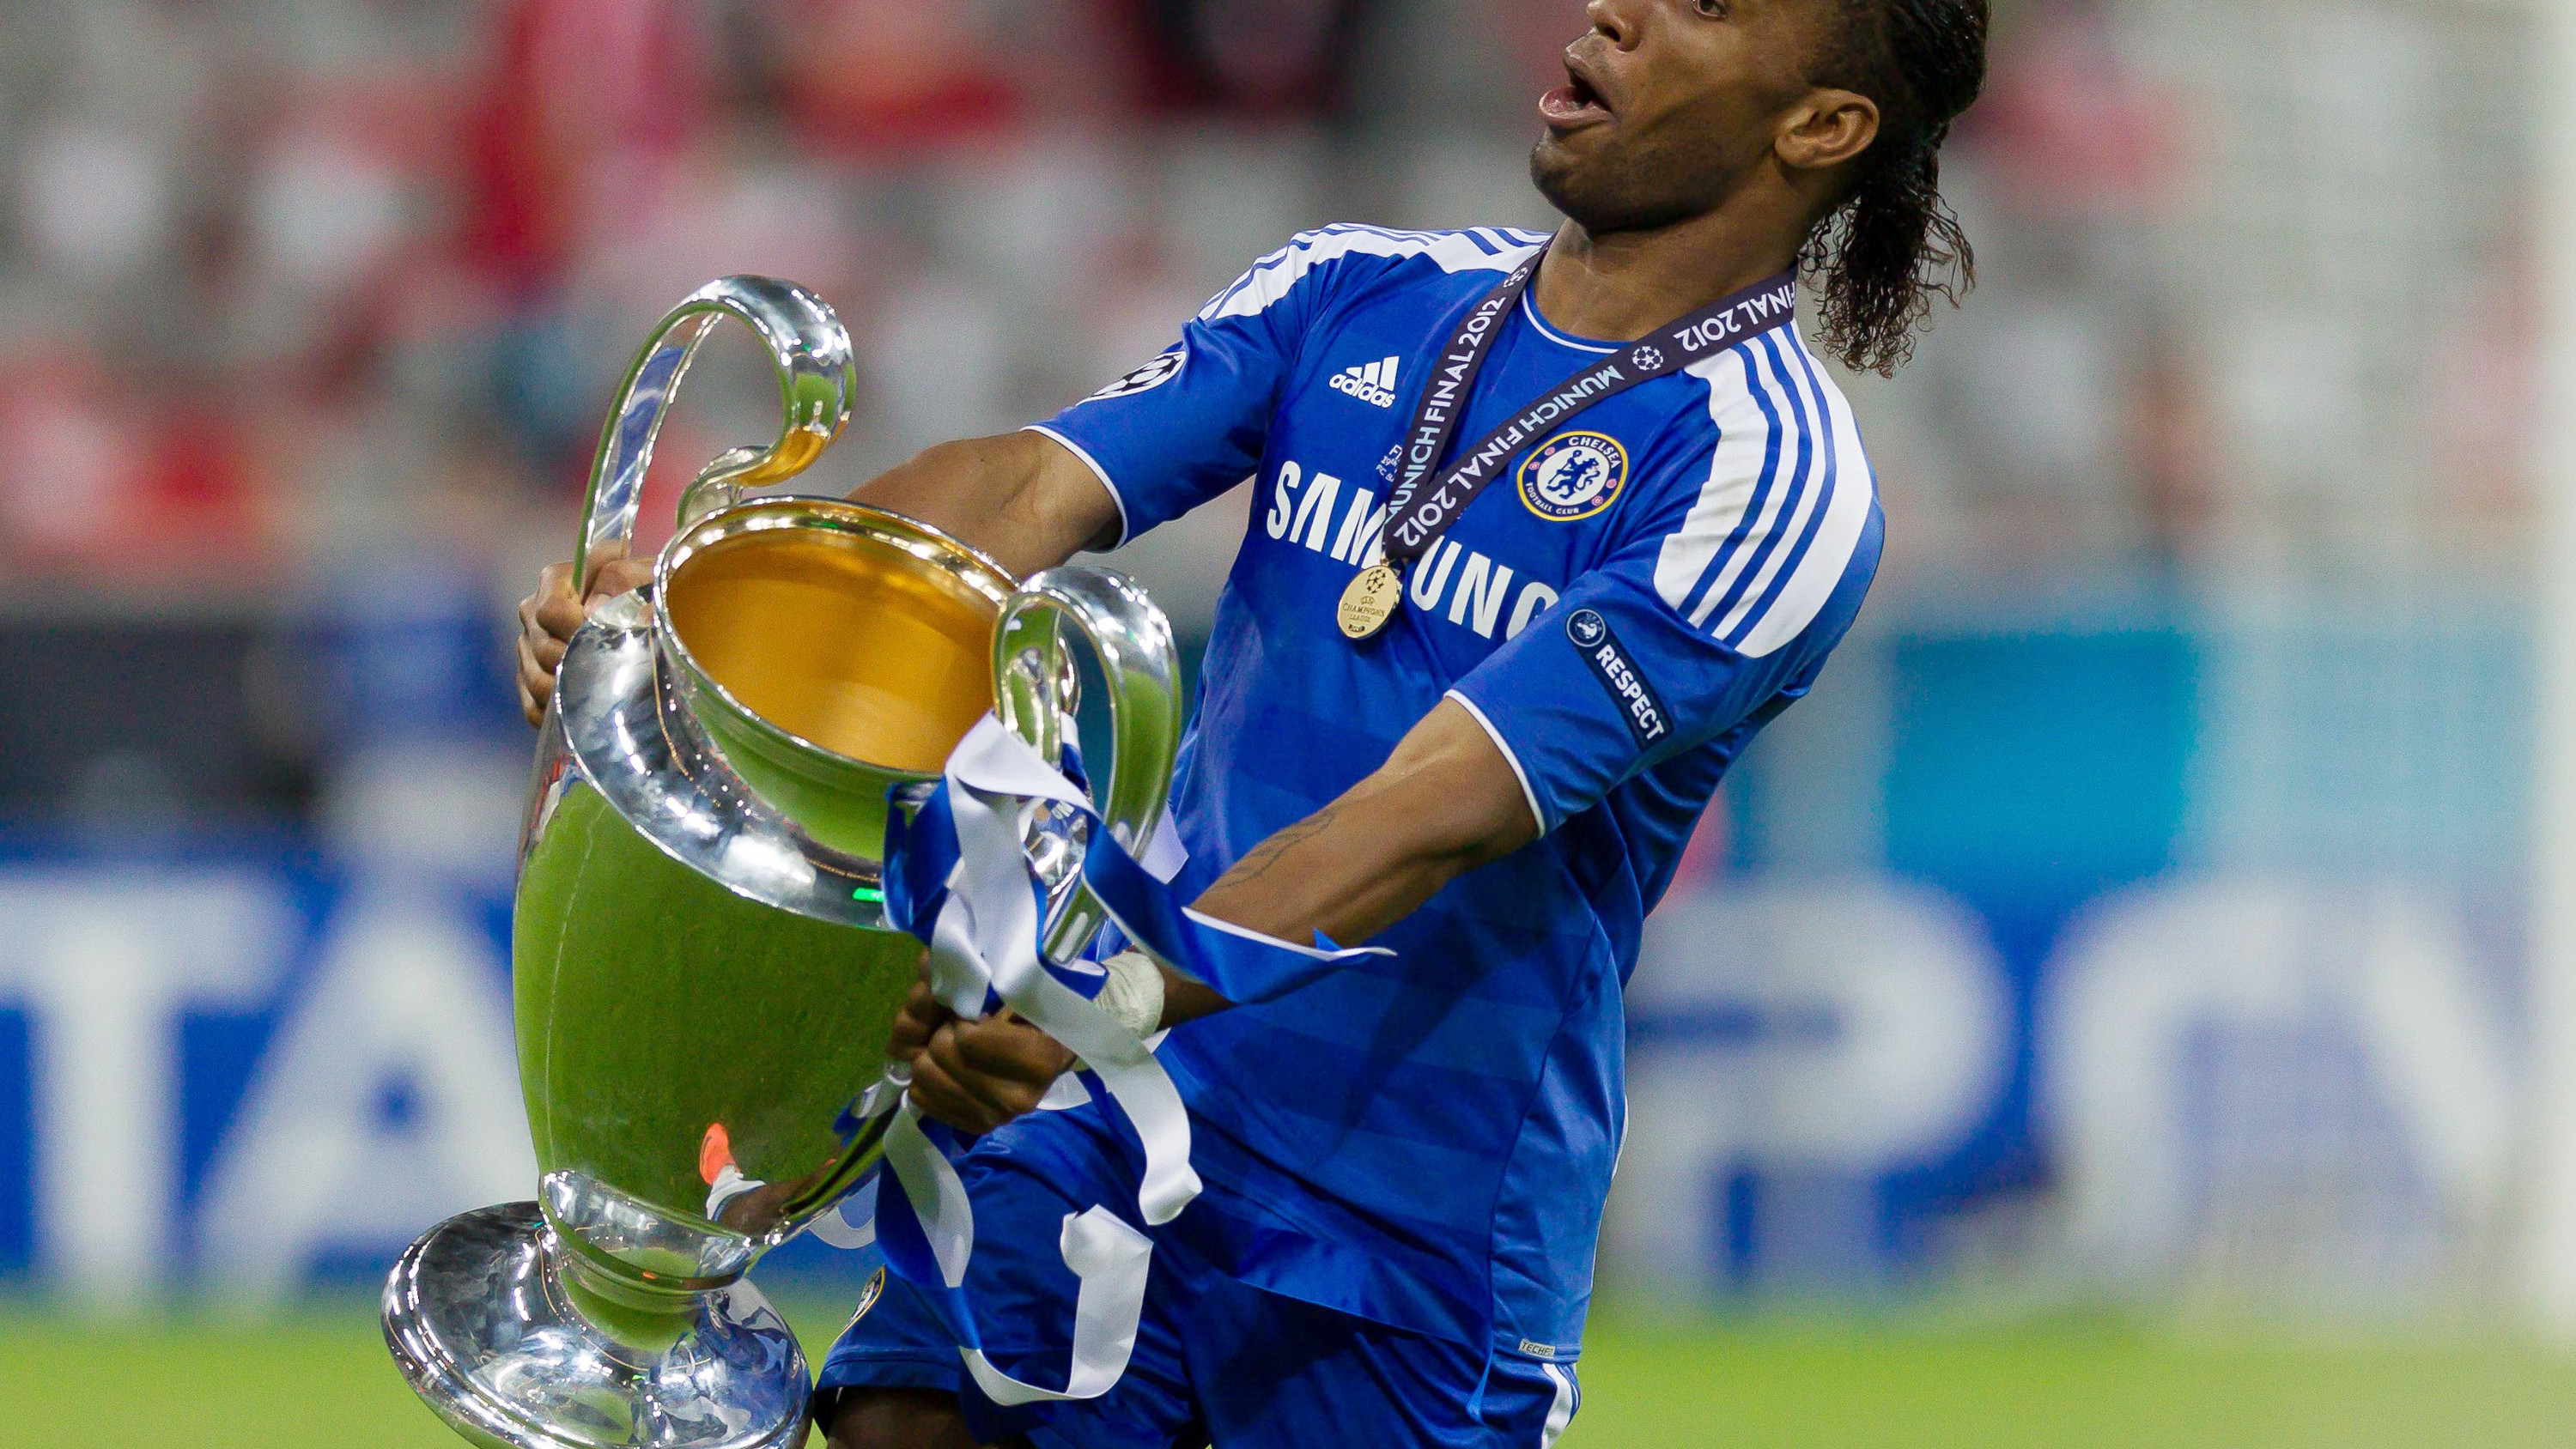 Didier Drogbas penalty that won the Champions League!🏆 Munich Memories Video Official Site Chelsea Football Club